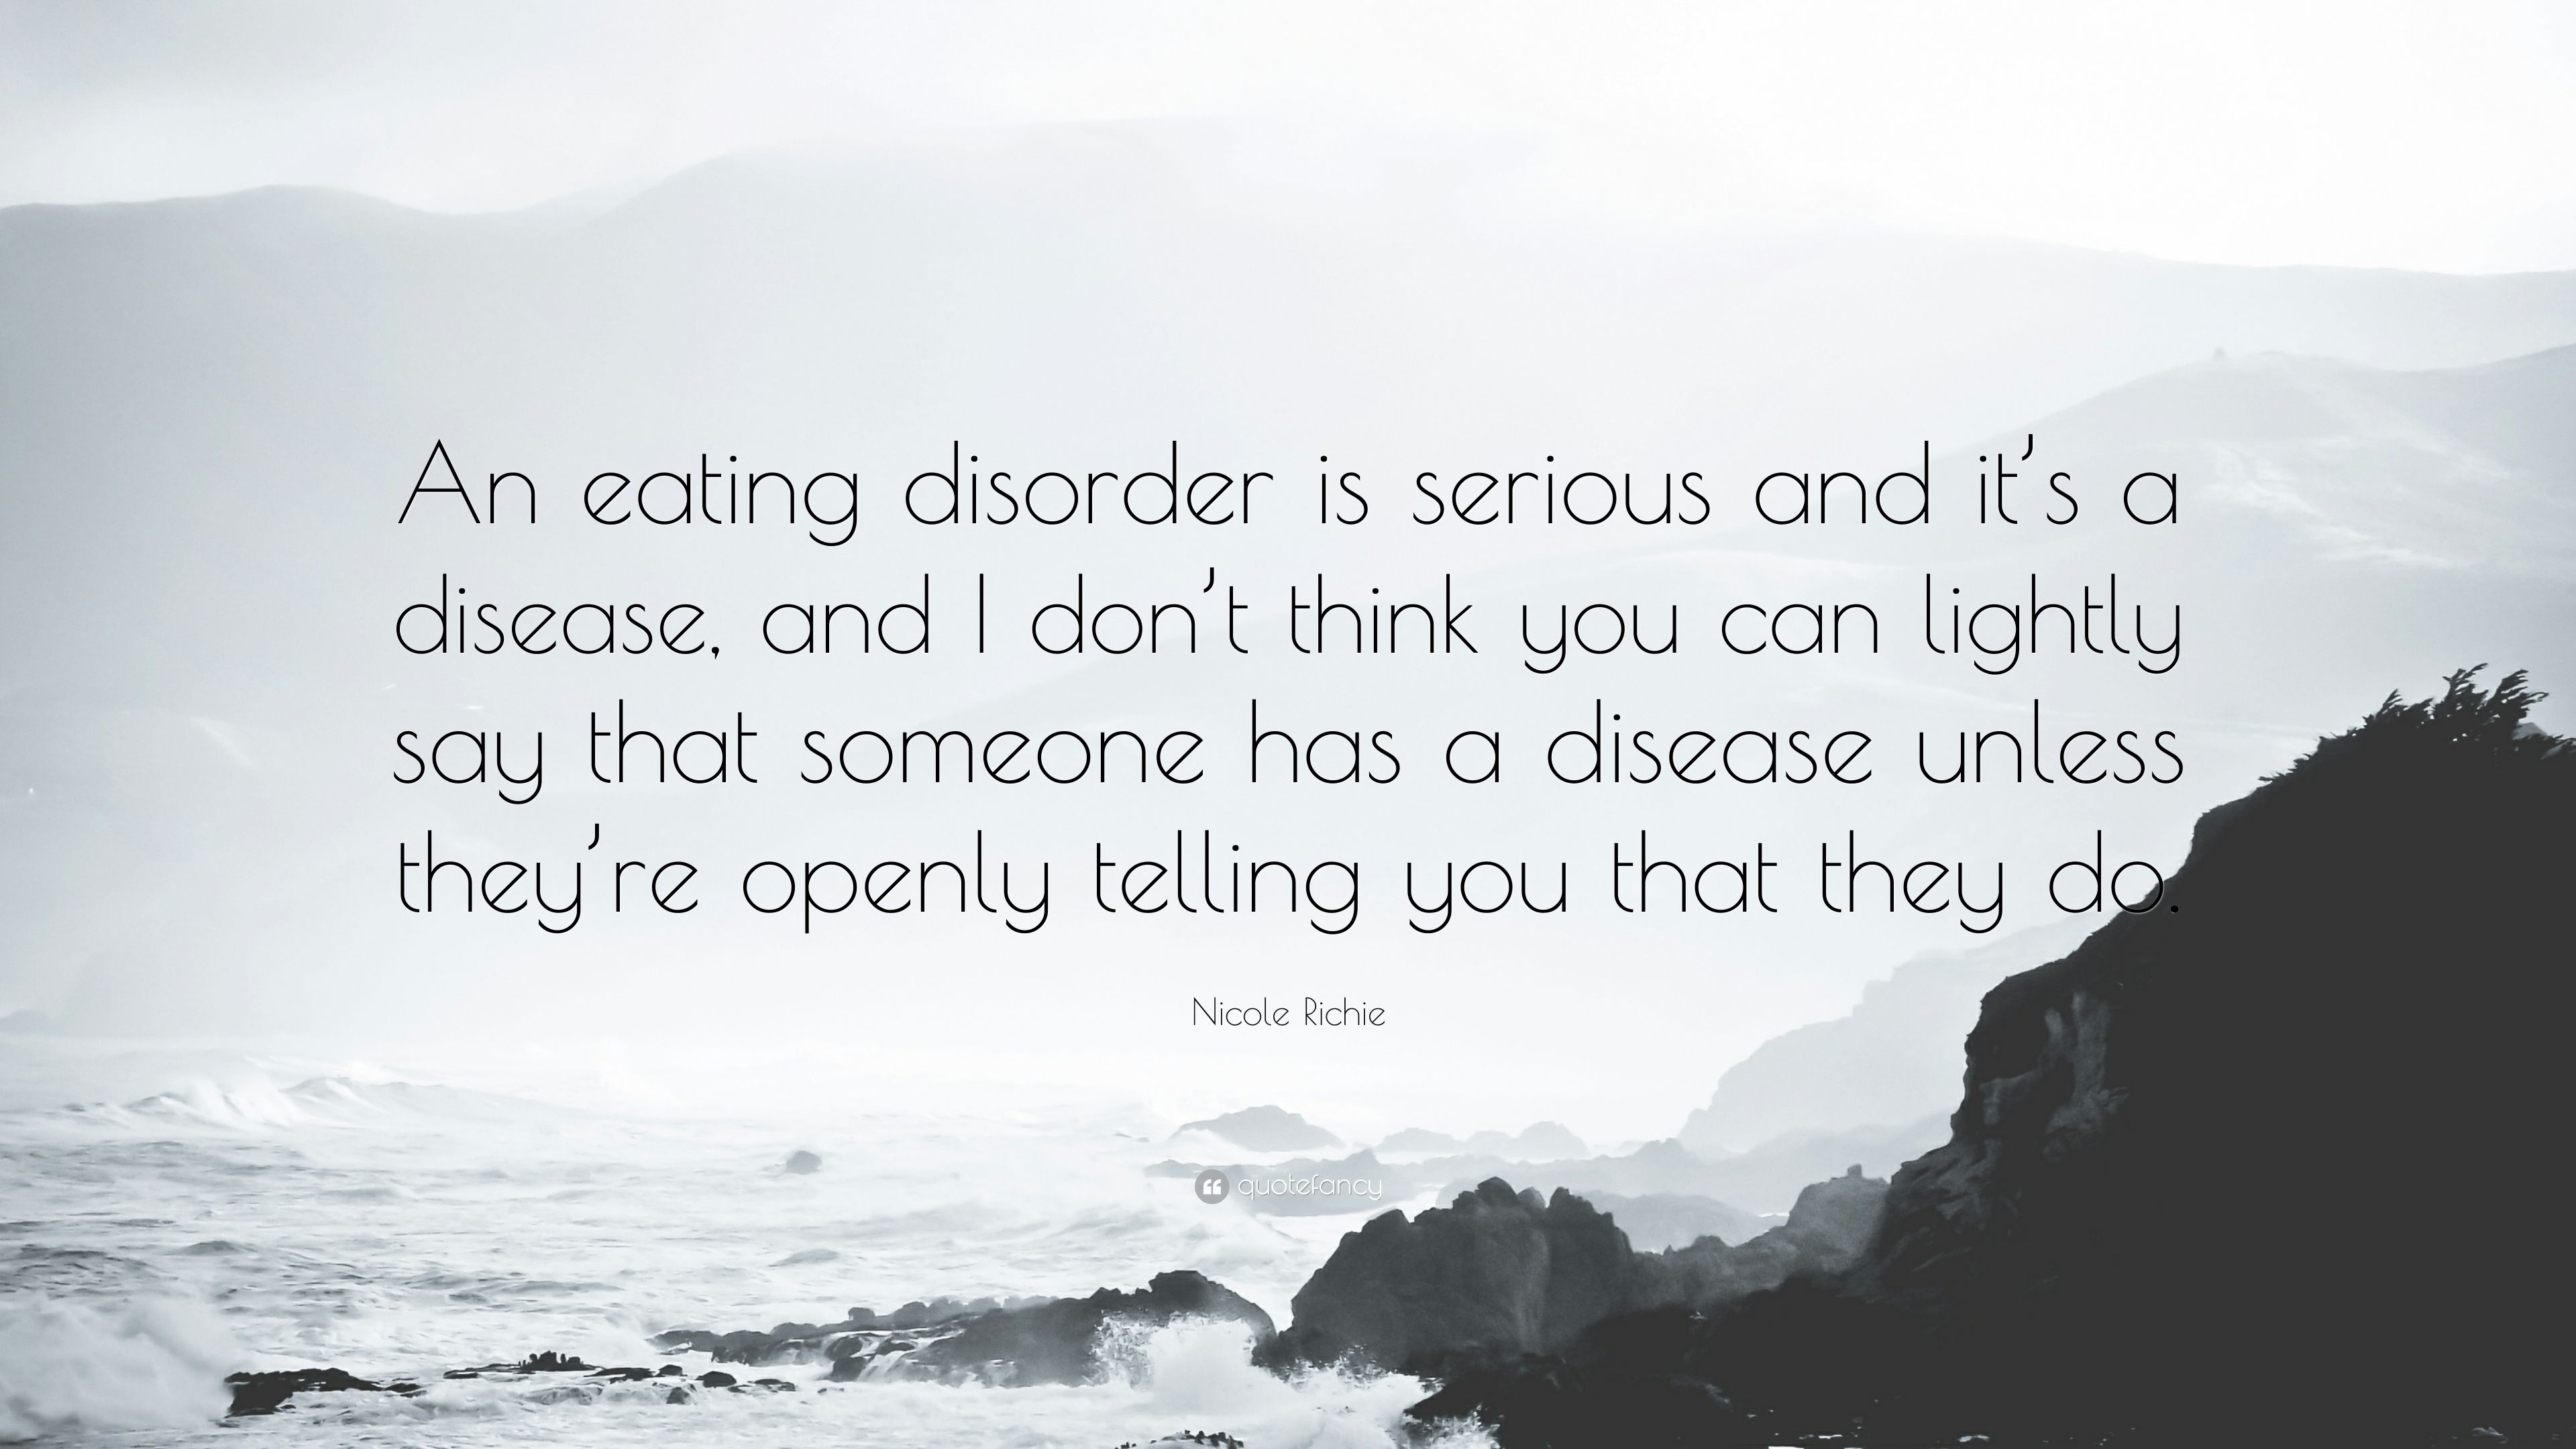 Nicole Richie Quote: “An eating disorder is serious and it's a disease, and I don't think you can lightly say that someone has a disease unles.” (7 wallpaper)